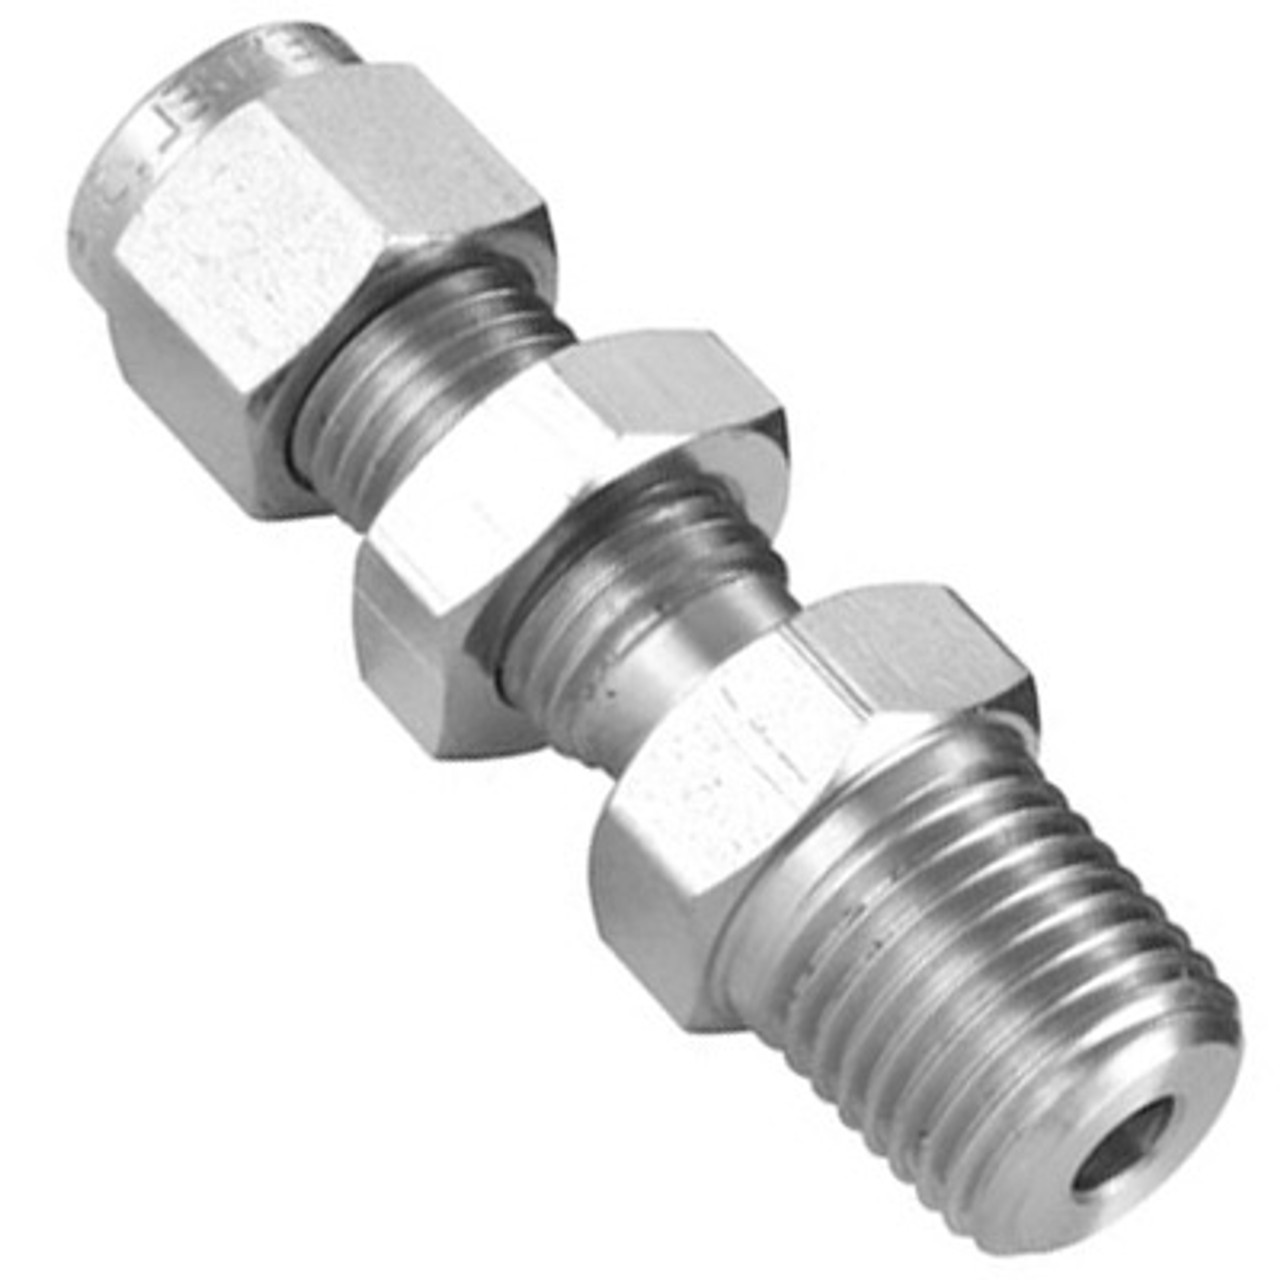 1 4 Stainless Steel Compression Fittings